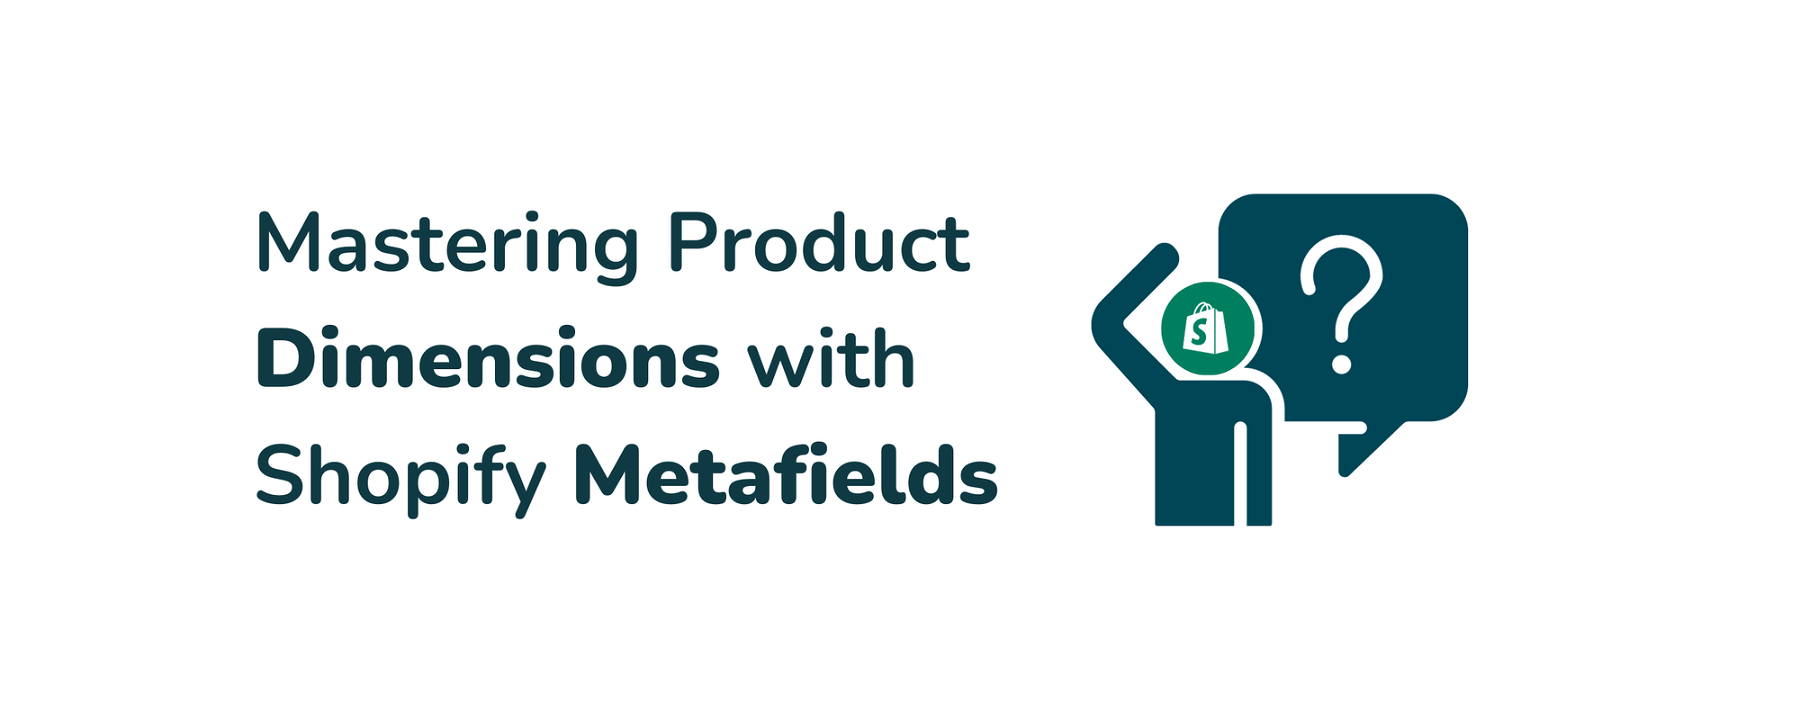 Mastering Product Dimensions with Shopify Metafields